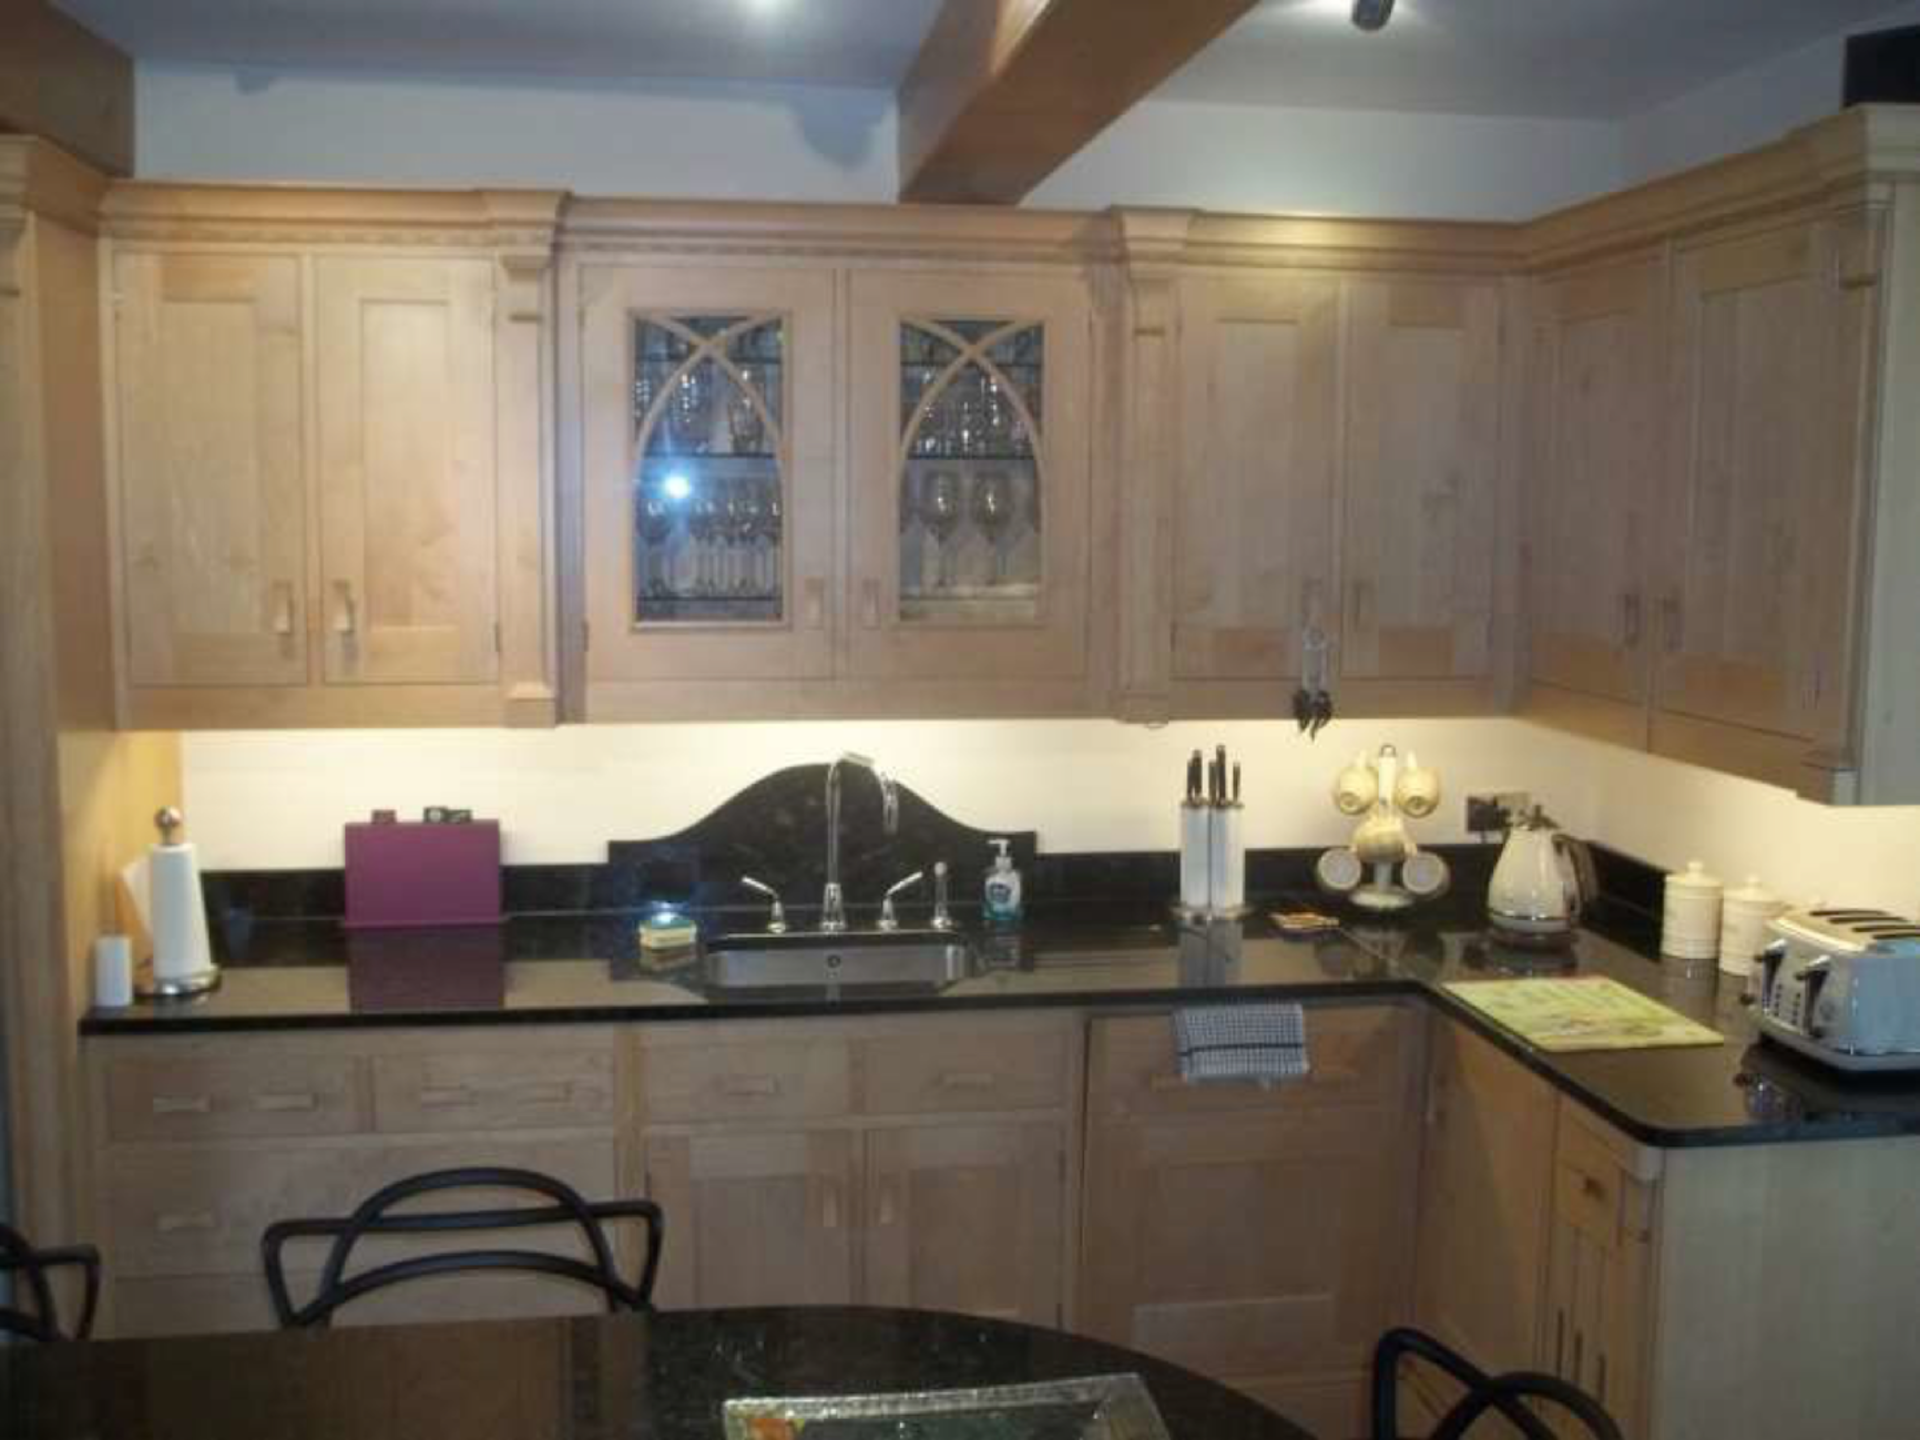 Luxury Used Mark Wilkinson Maple "Mai" Kitchen Complete with Aga and Miele Appliances - Image 3 of 14